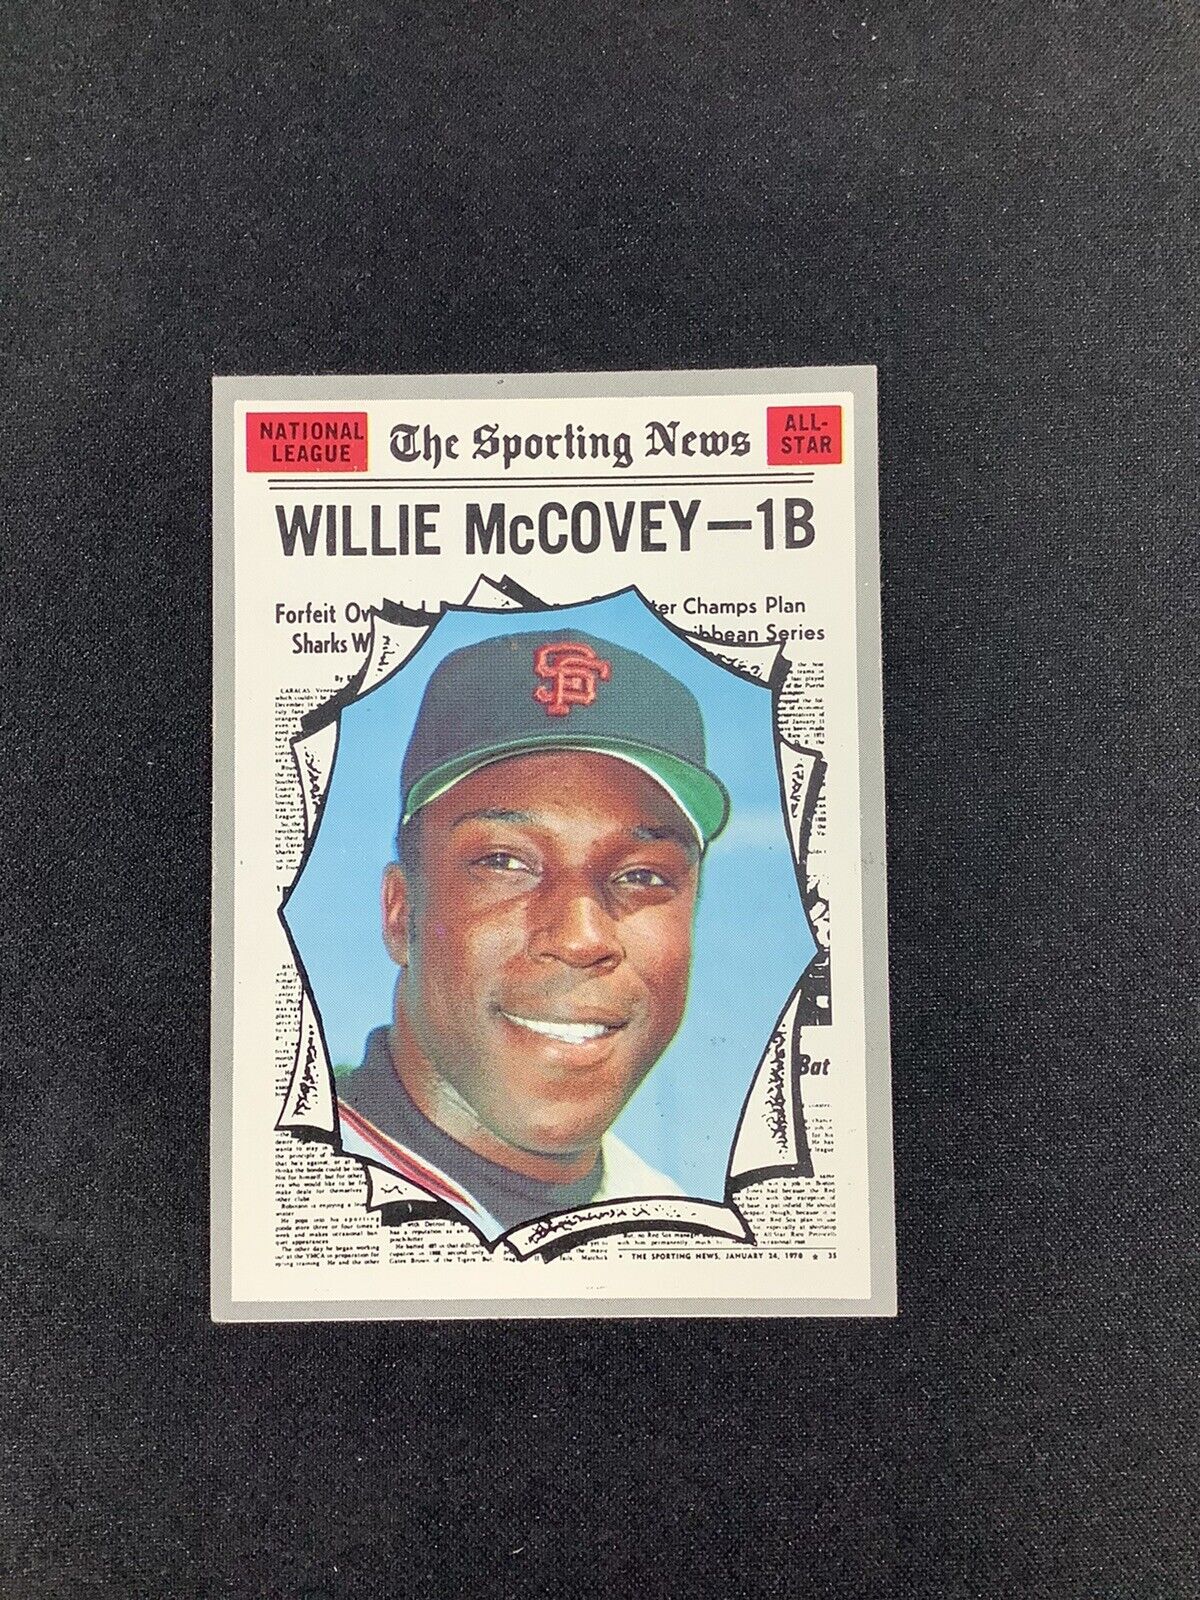 1970 Topps Willie McCovey #450 The Sporting News National League All Star Giants